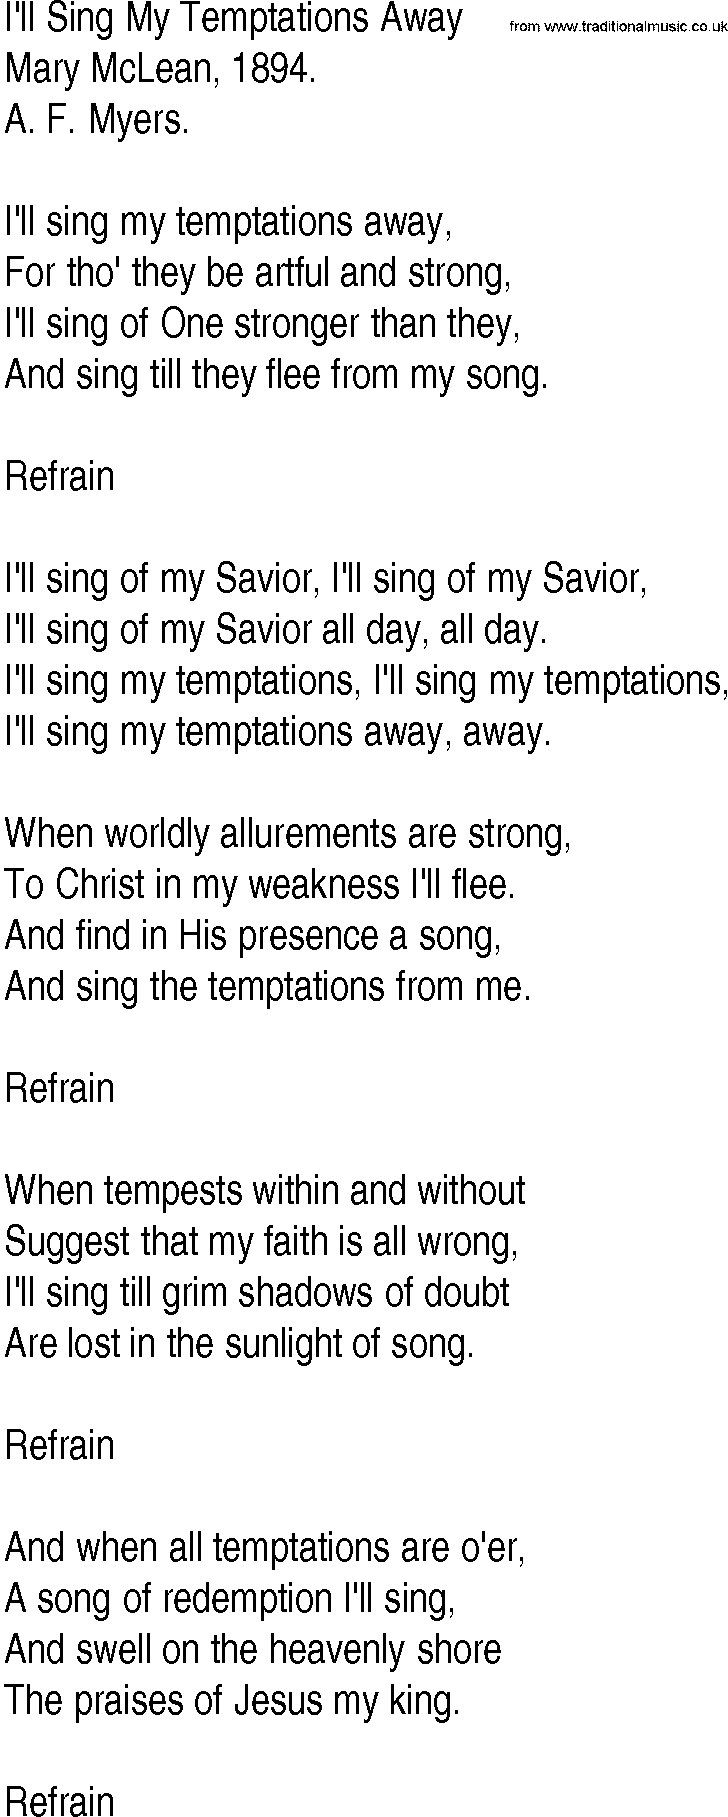 Hymn and Gospel Song: I'll Sing My Temptations Away by Mary McLean lyrics